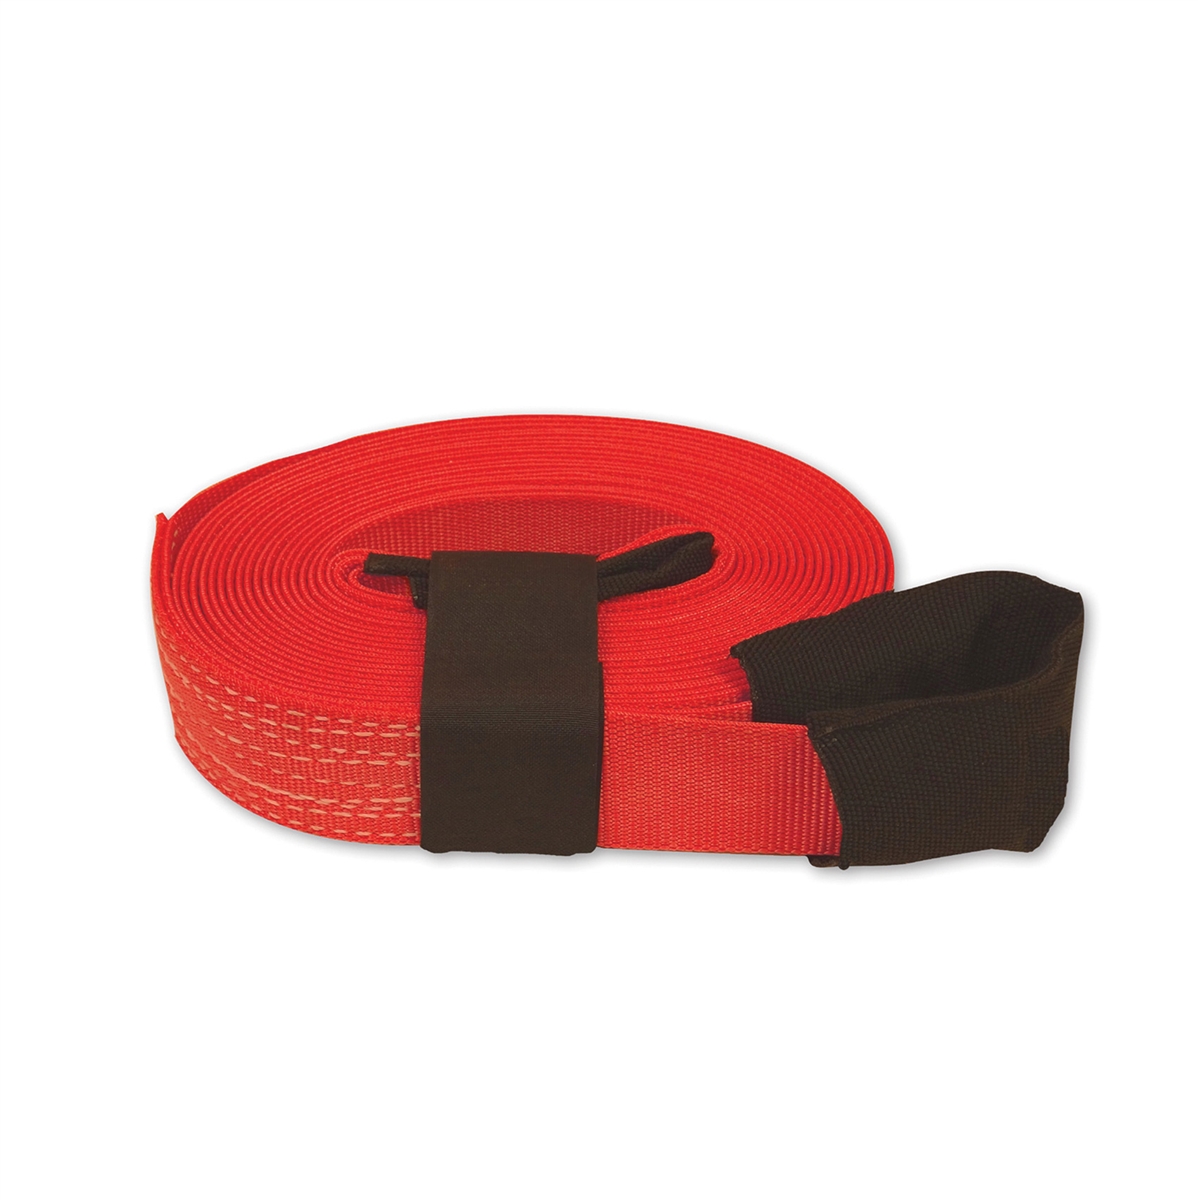 Snap-Loc 4 x 30 in. Red Tow Strap SLTT430K20R